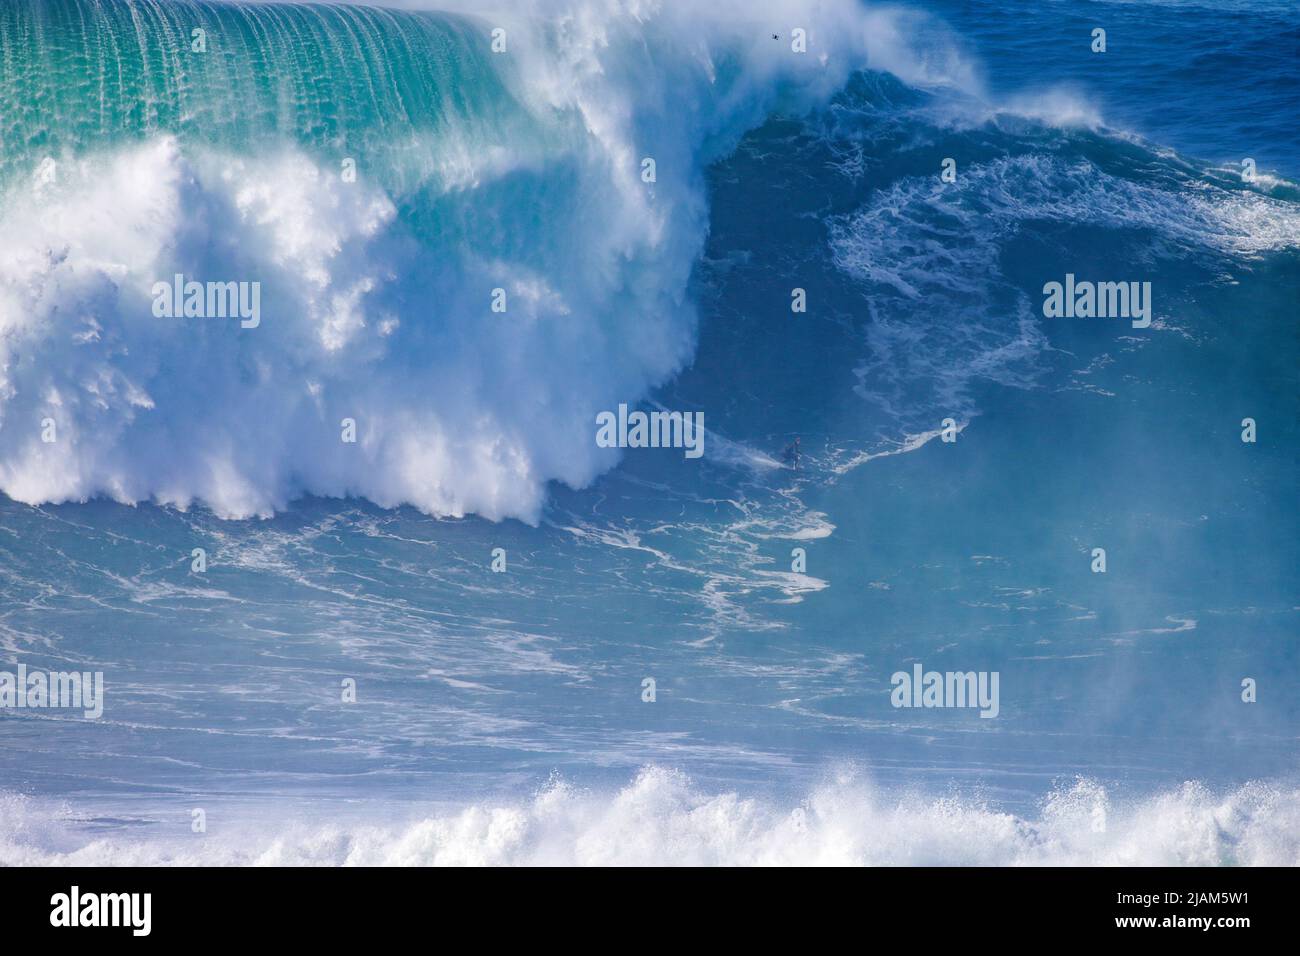 A new world record title has been officially recognized and awarded on May 25, 2022 to the German big wave surfer Sebastian Steudtner, who became the Stock Photo